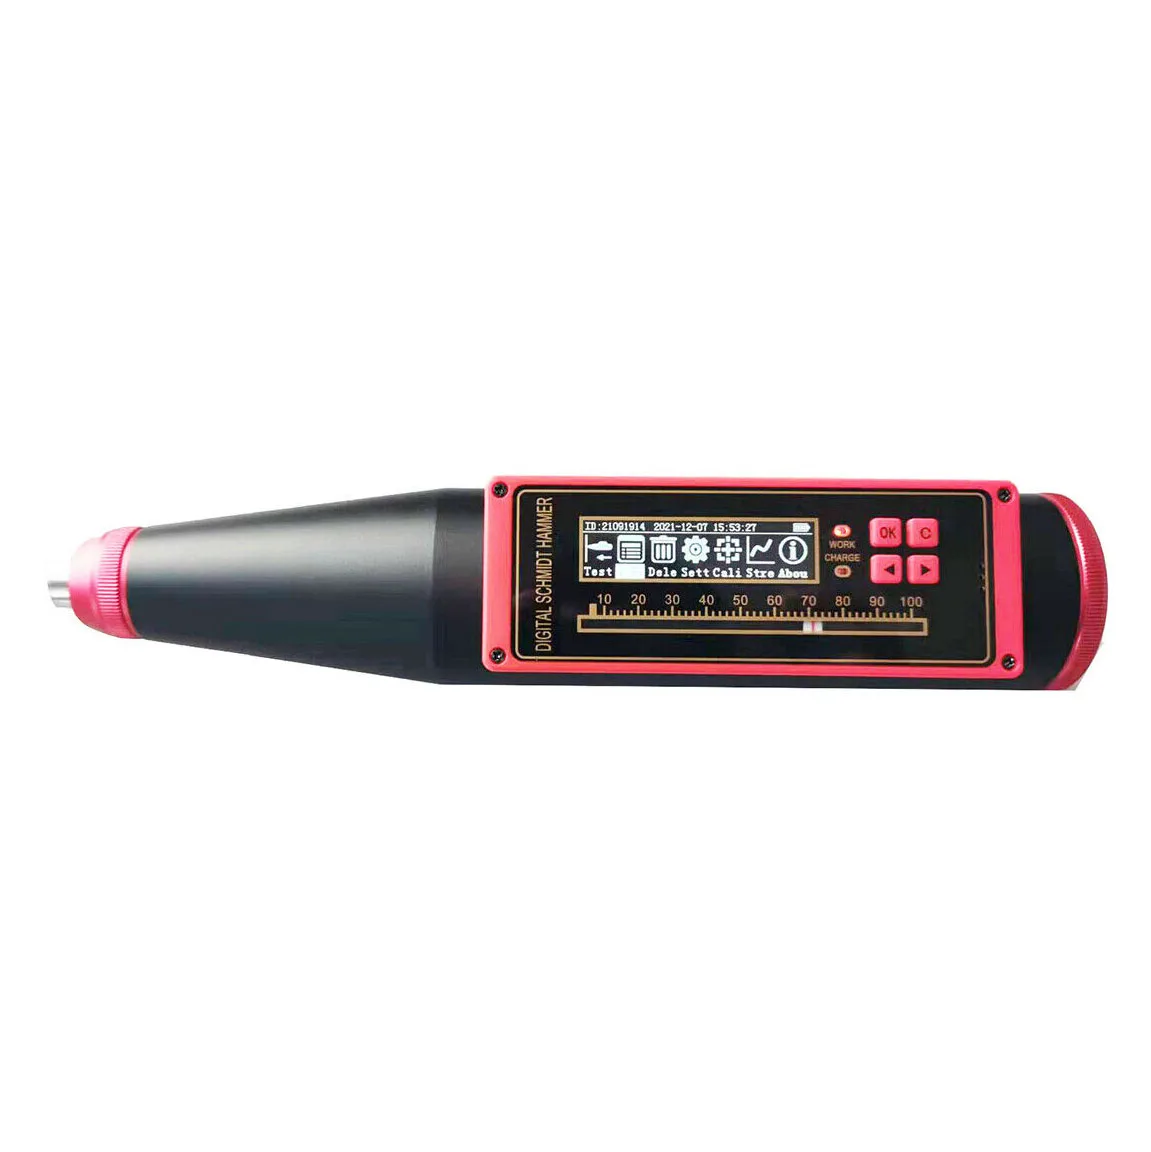 

Digital Concrete Rebound Hammer with Real Time Test OLED Display